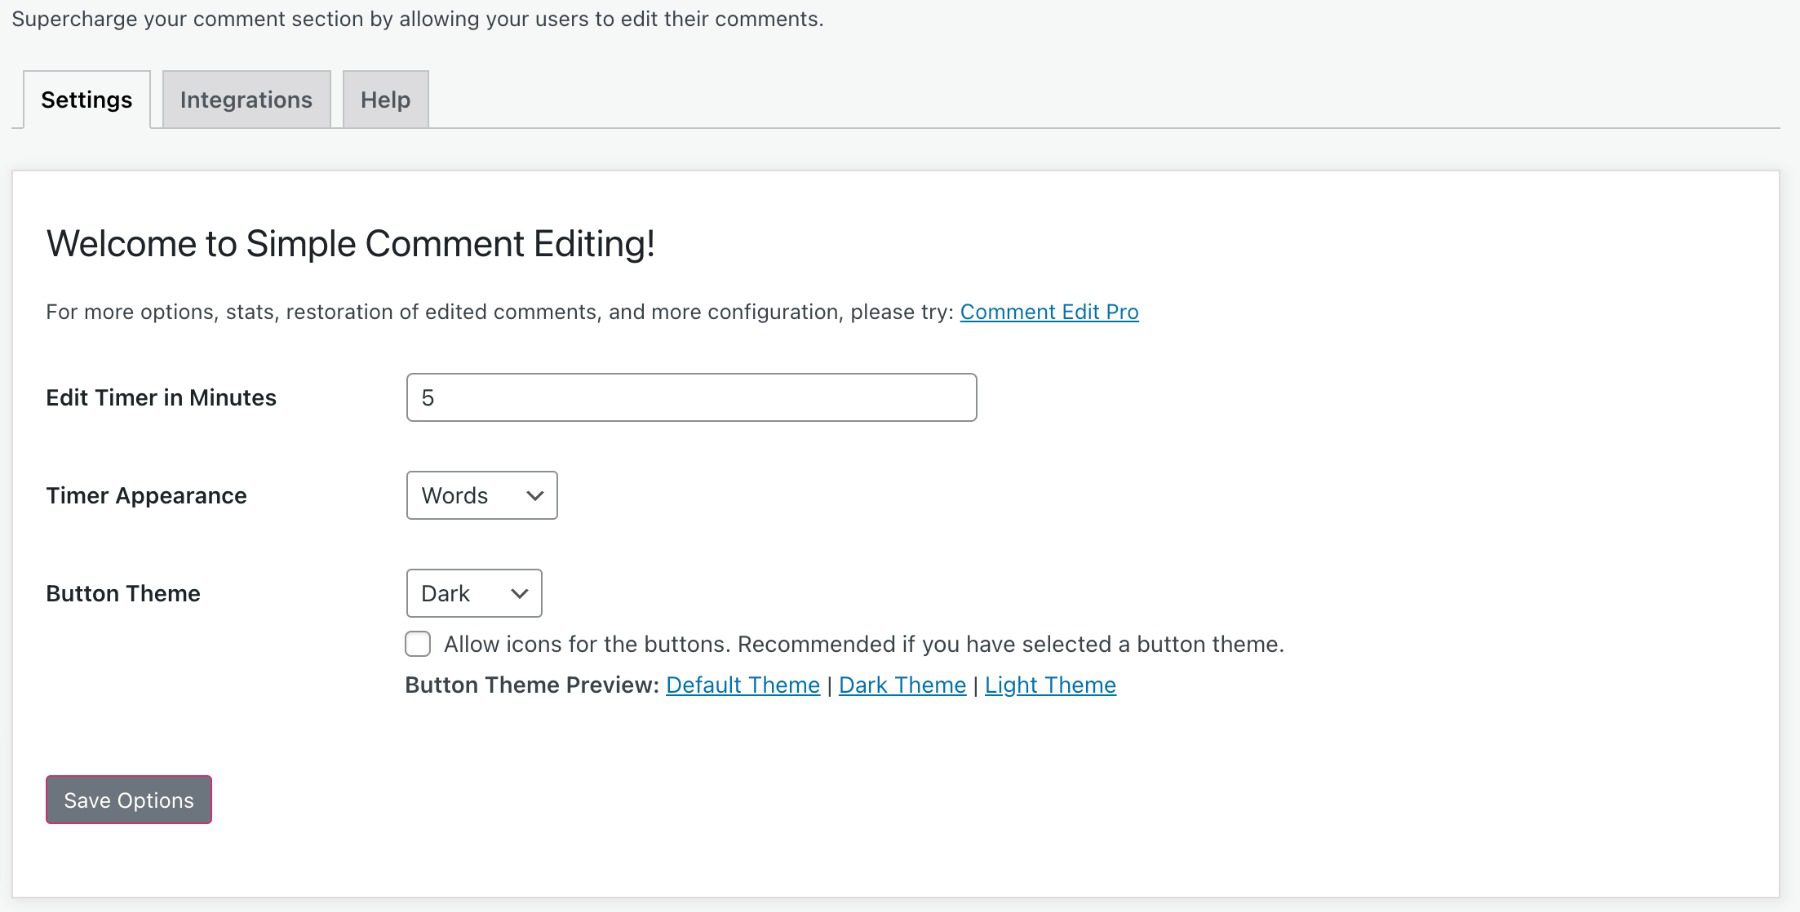 Simple Comment Editing settings page